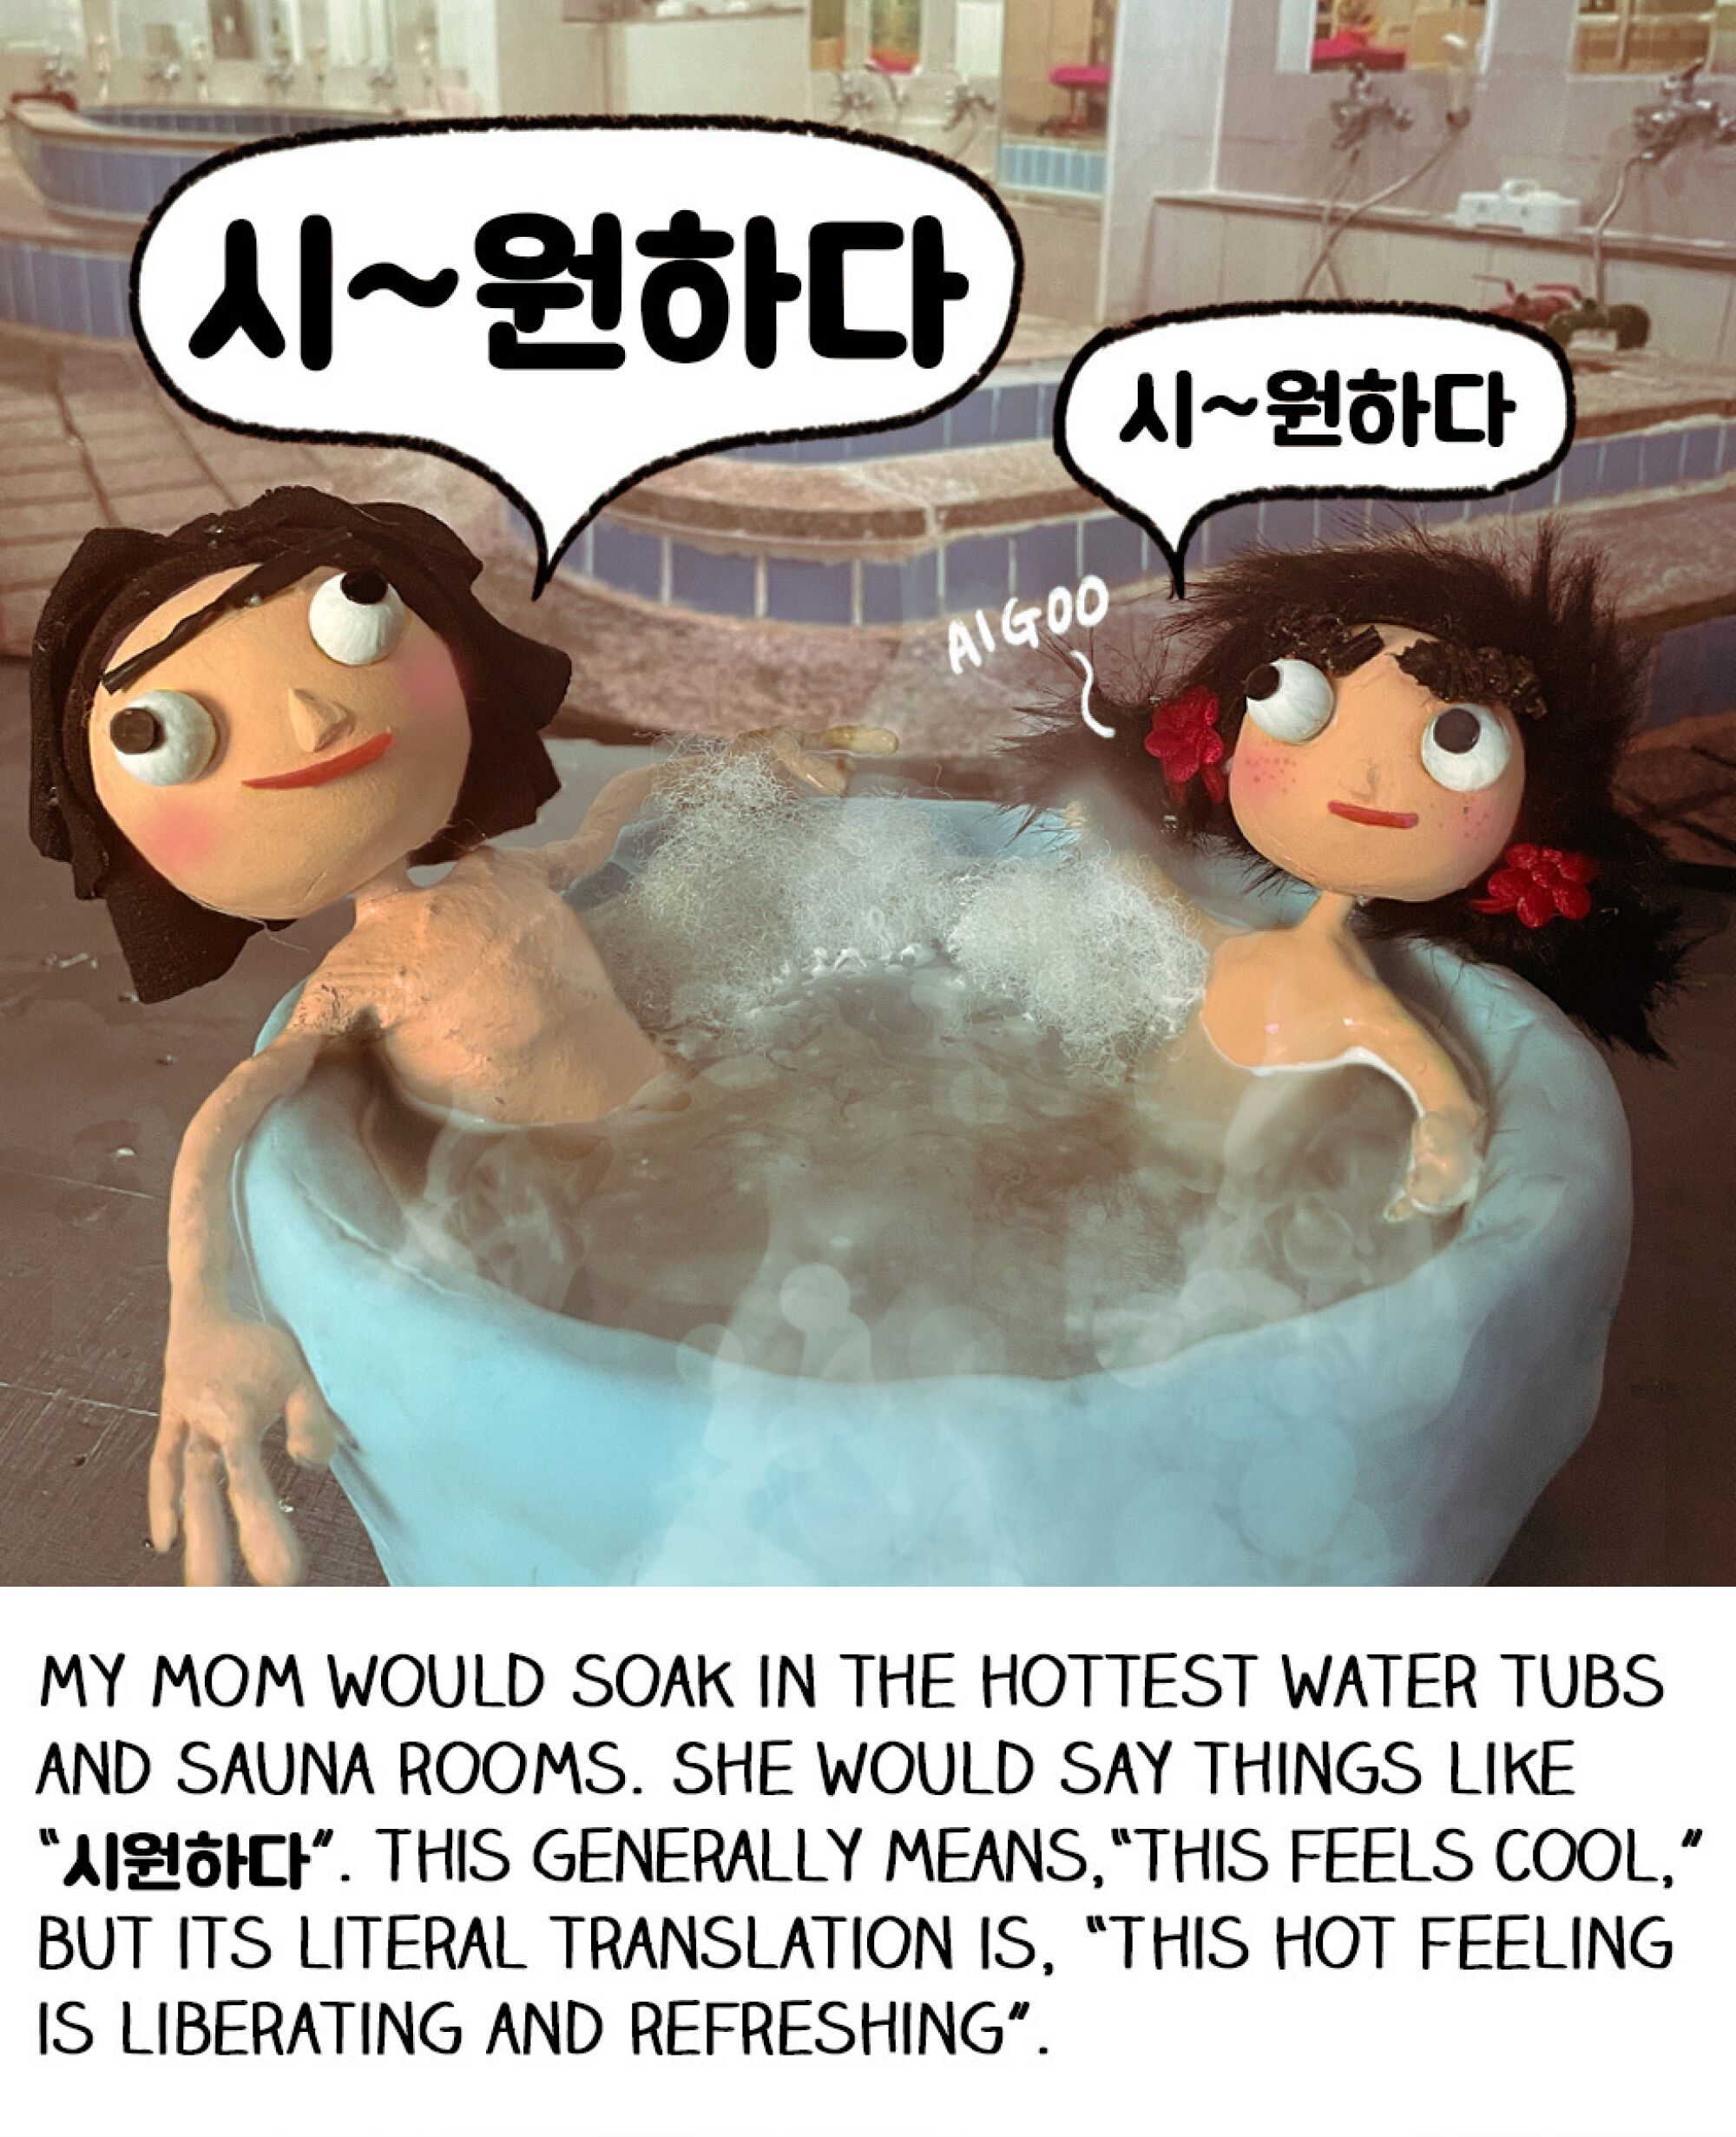 A photo of a mom and daughter puppet in a hot tub, smiling.